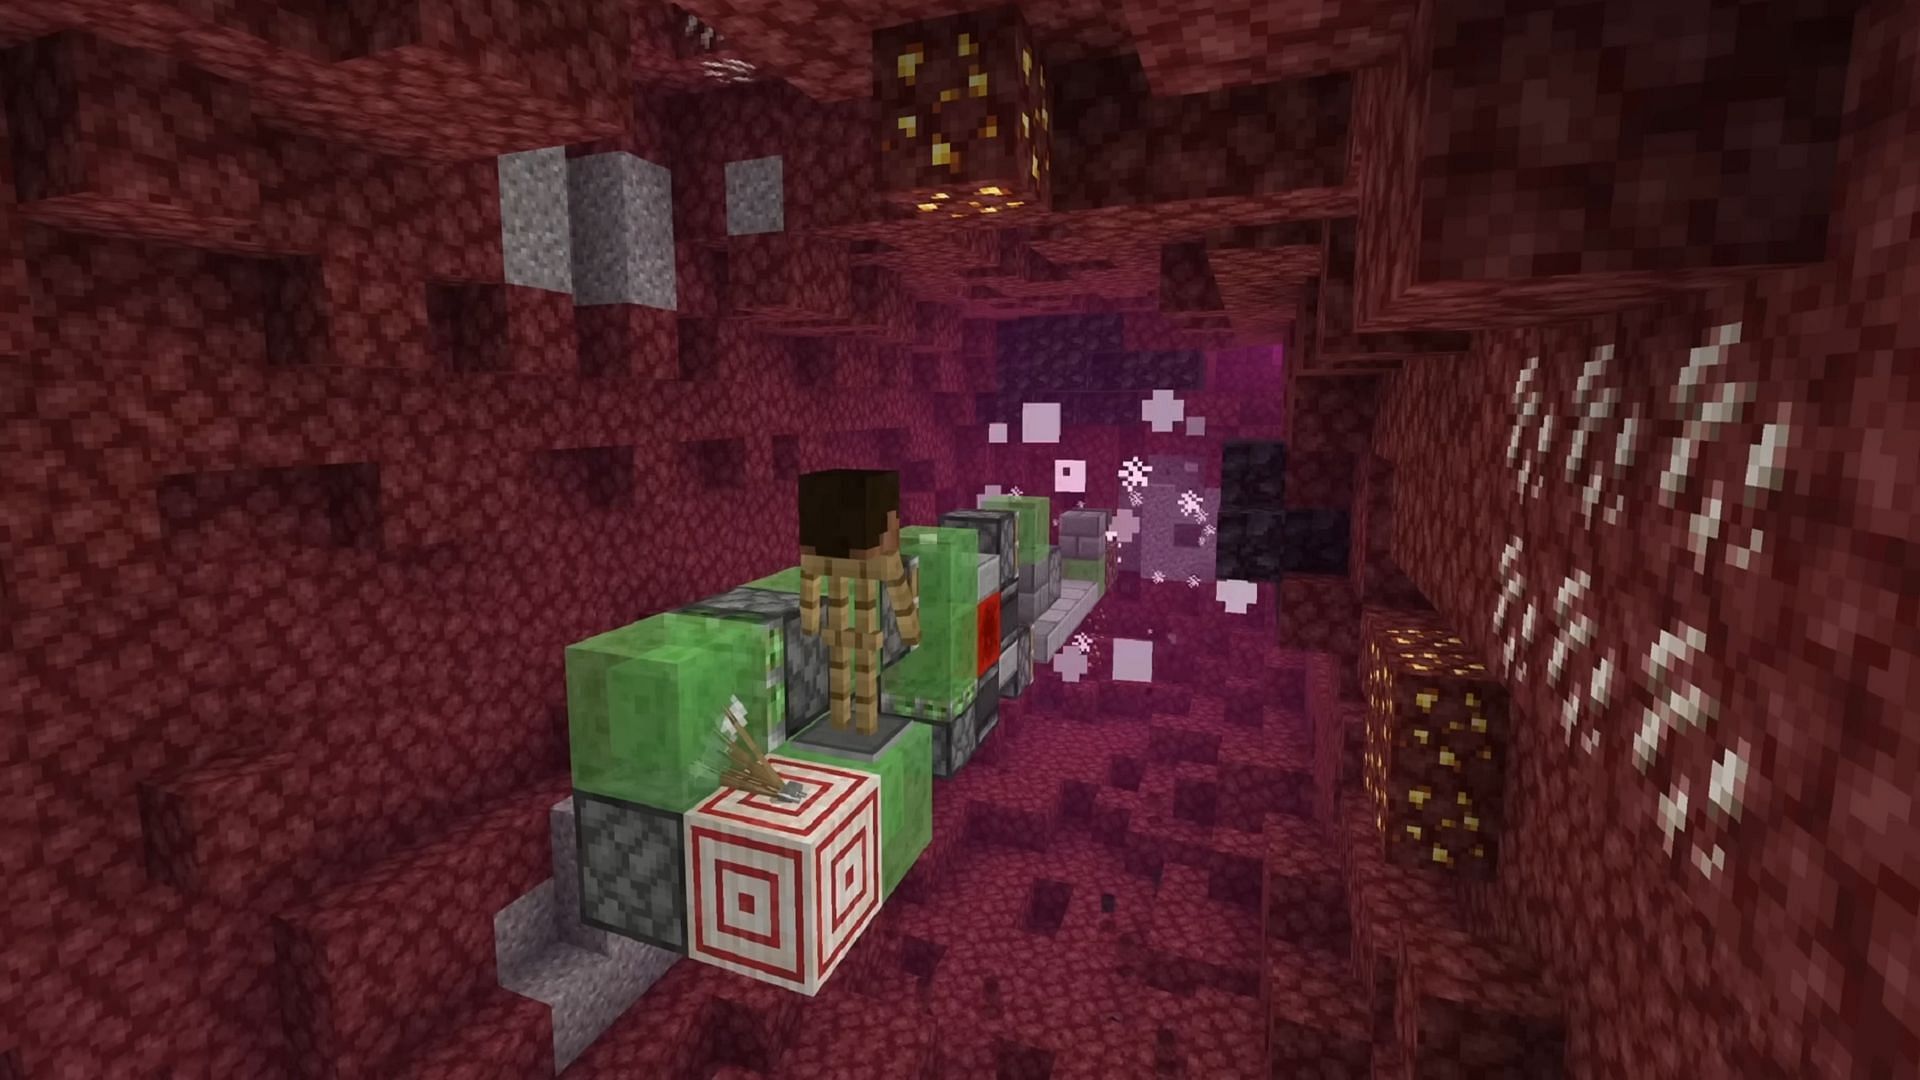 This singular machine can result in massive amounts of ancient debris for Minecraft players (Image via Silentwisperer/YouTube)